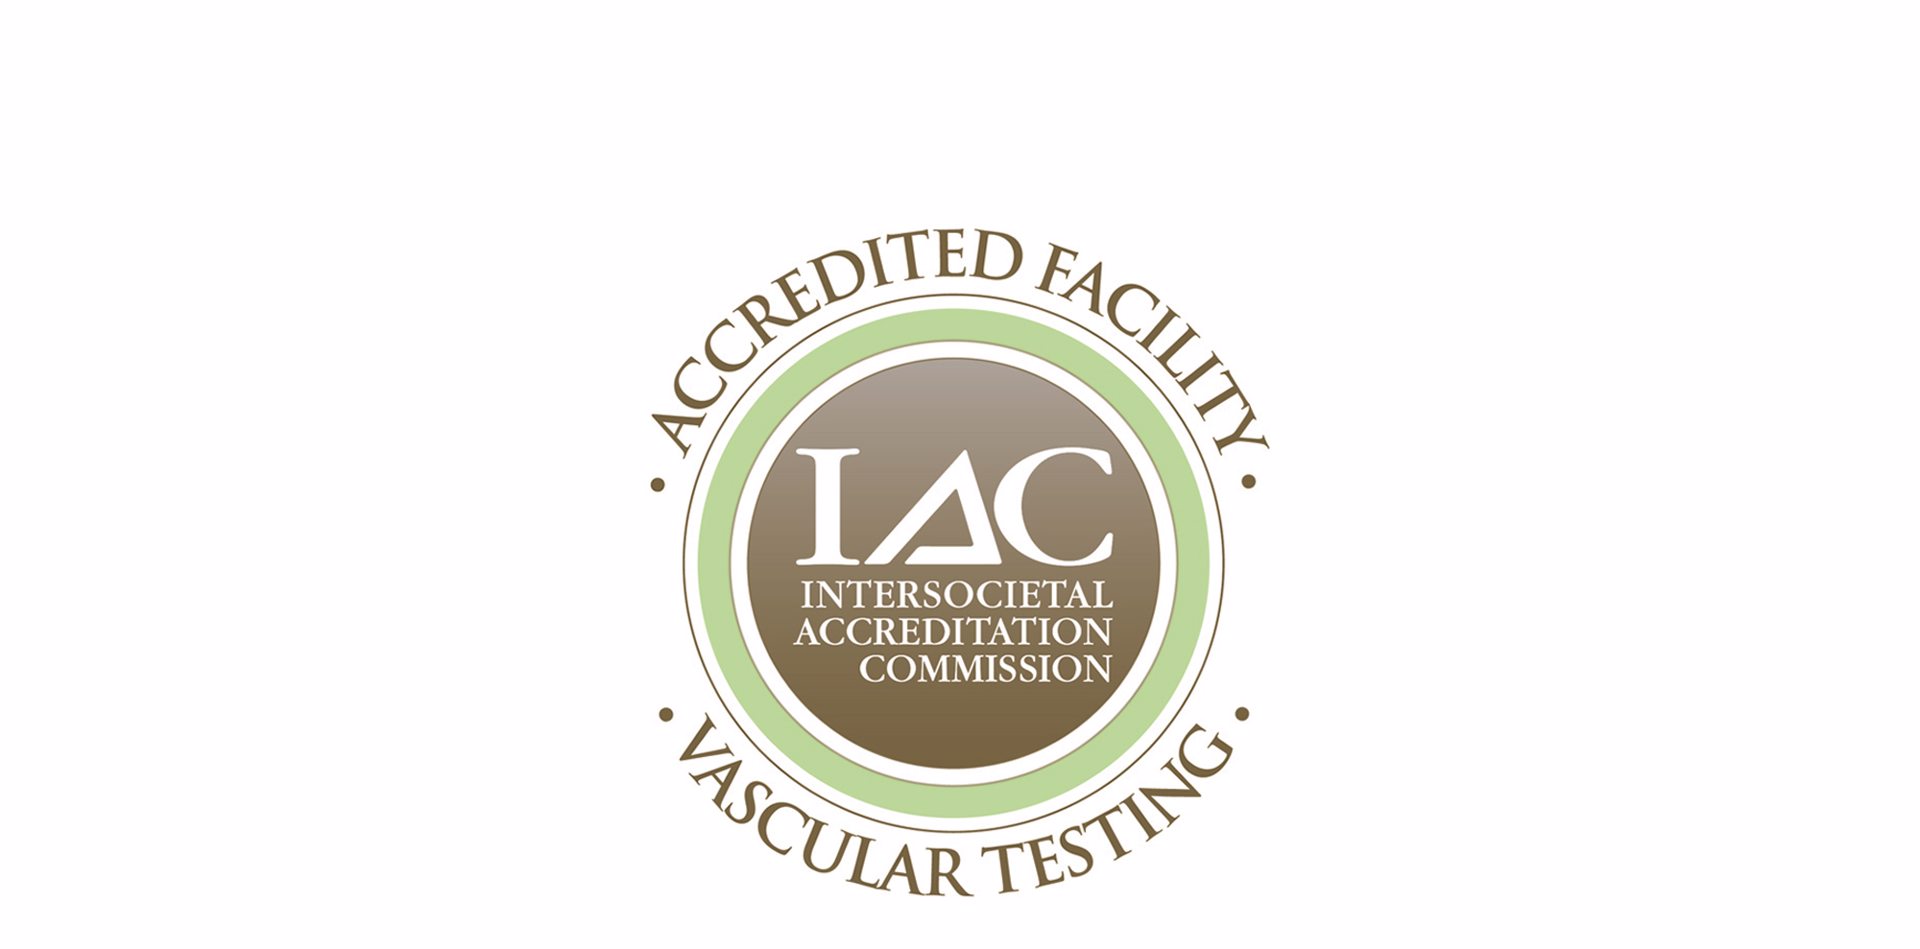 Evangelical Community Hospital Imaging Centers Earn Vascular Testing Reaccreditation from the IAC